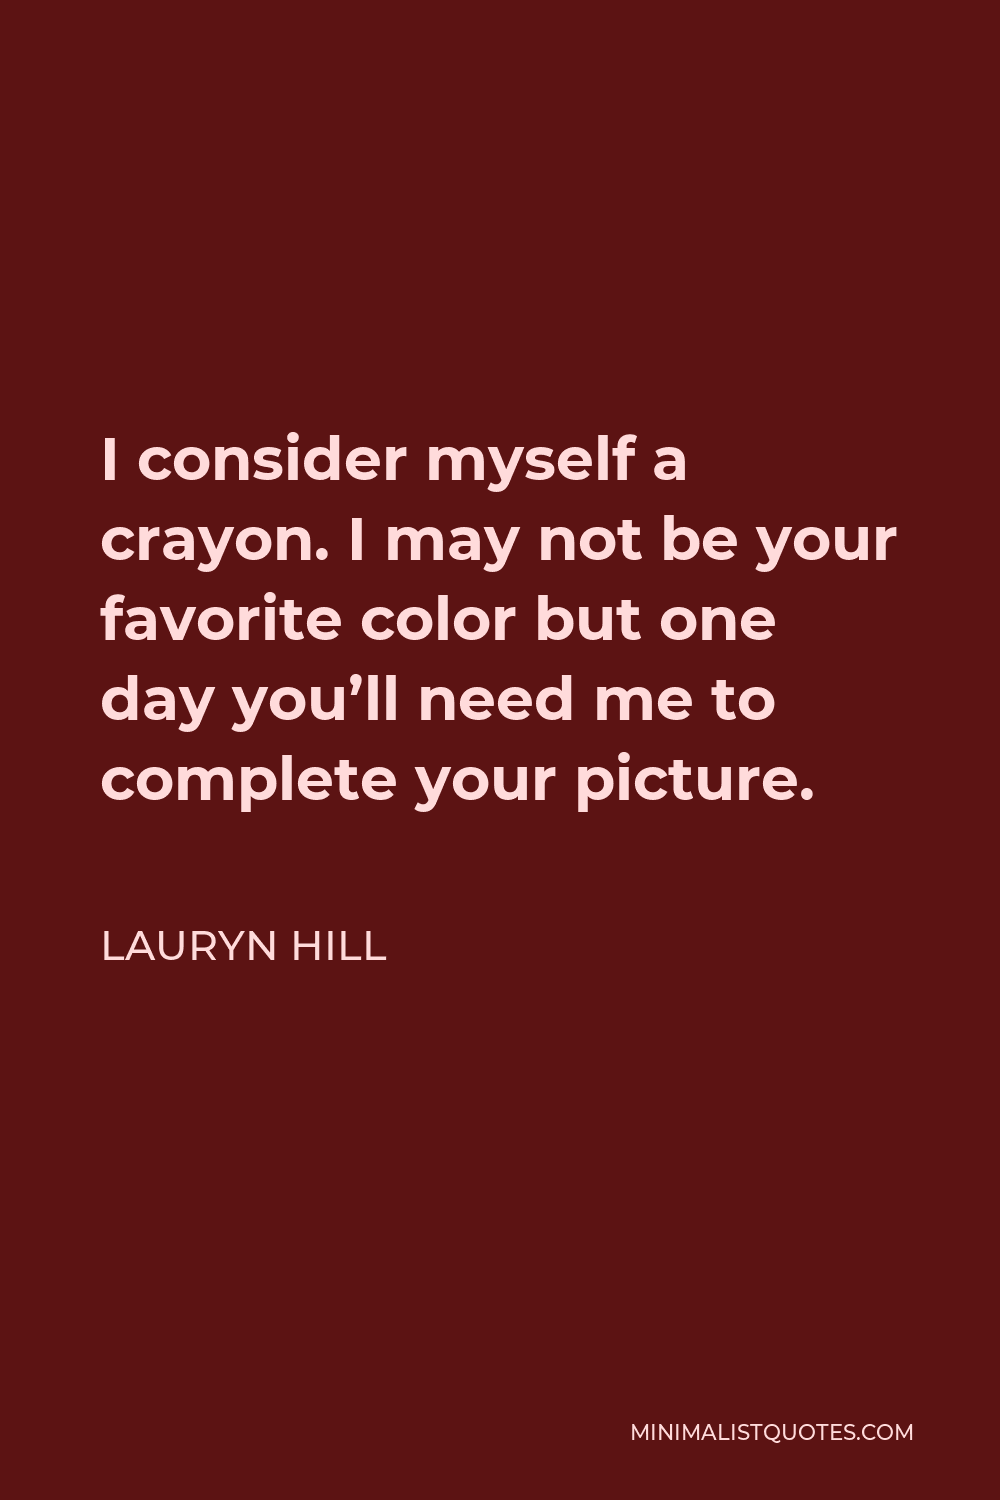 Lauryn Hill Quote I Consider Myself A Crayon I May Not Be Your Favorite Color But One Day You